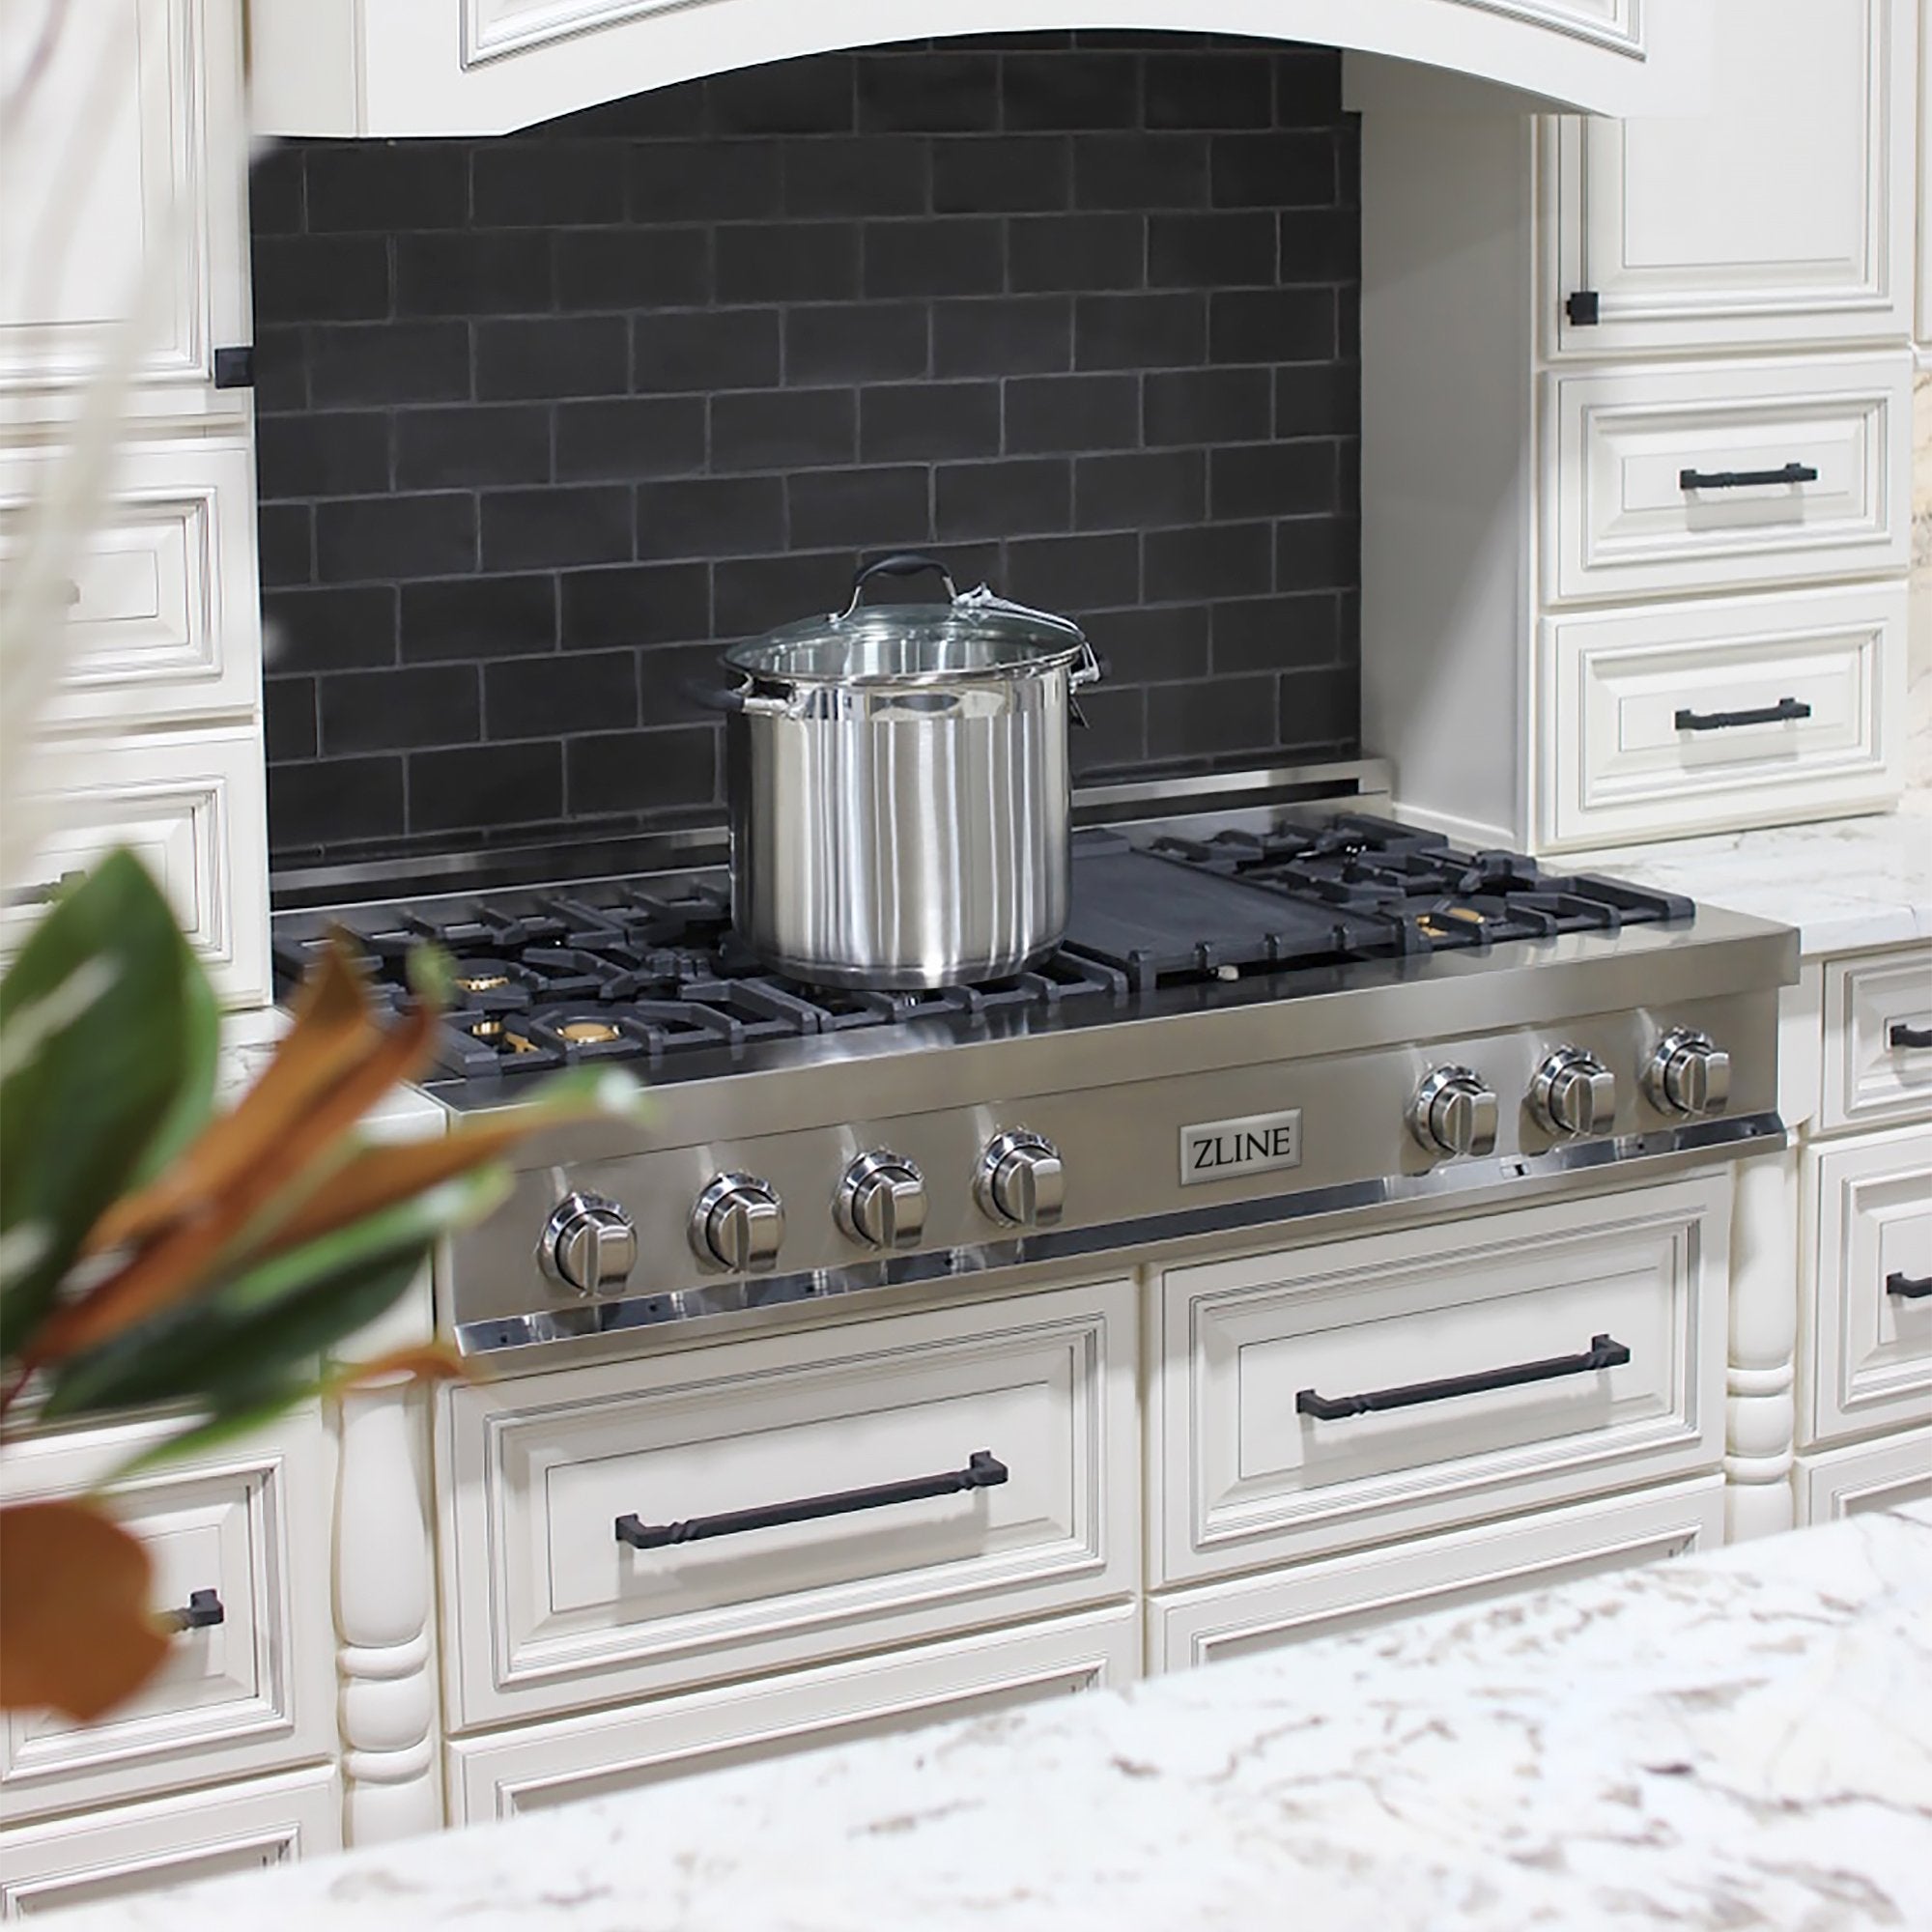 ZLINE 48" Porcelain Gas Stovetop with 7 Gas Burners and Griddle (RT48) Available with Brass Burners - Rustic Kitchen & Bath - Rangetops - ZLINE Kitchen and Bath